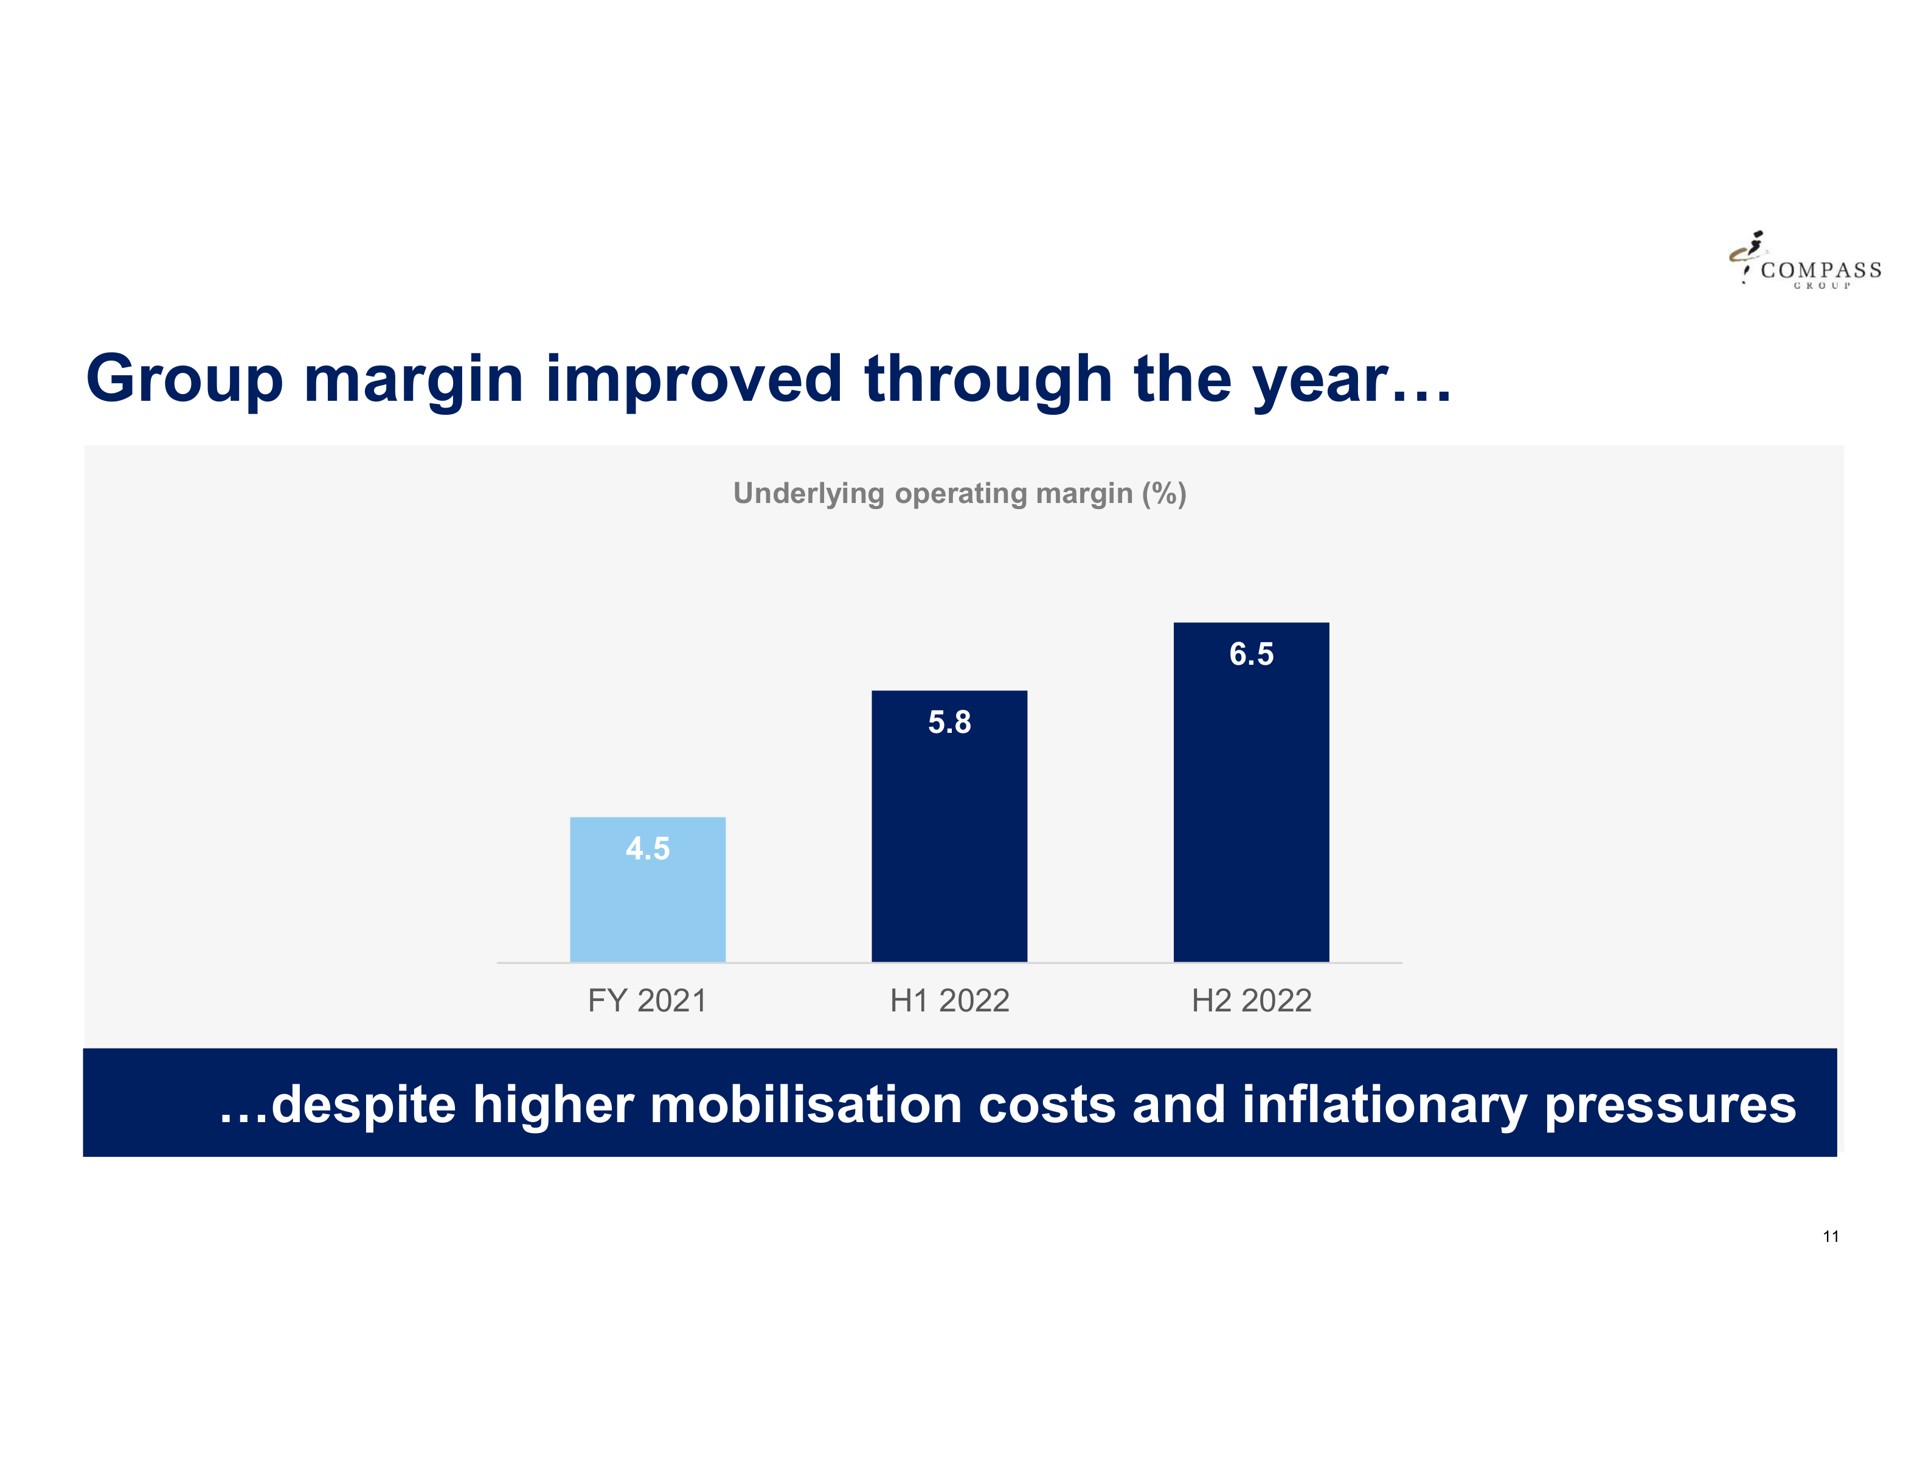 group margin improved through the year | Compass Group